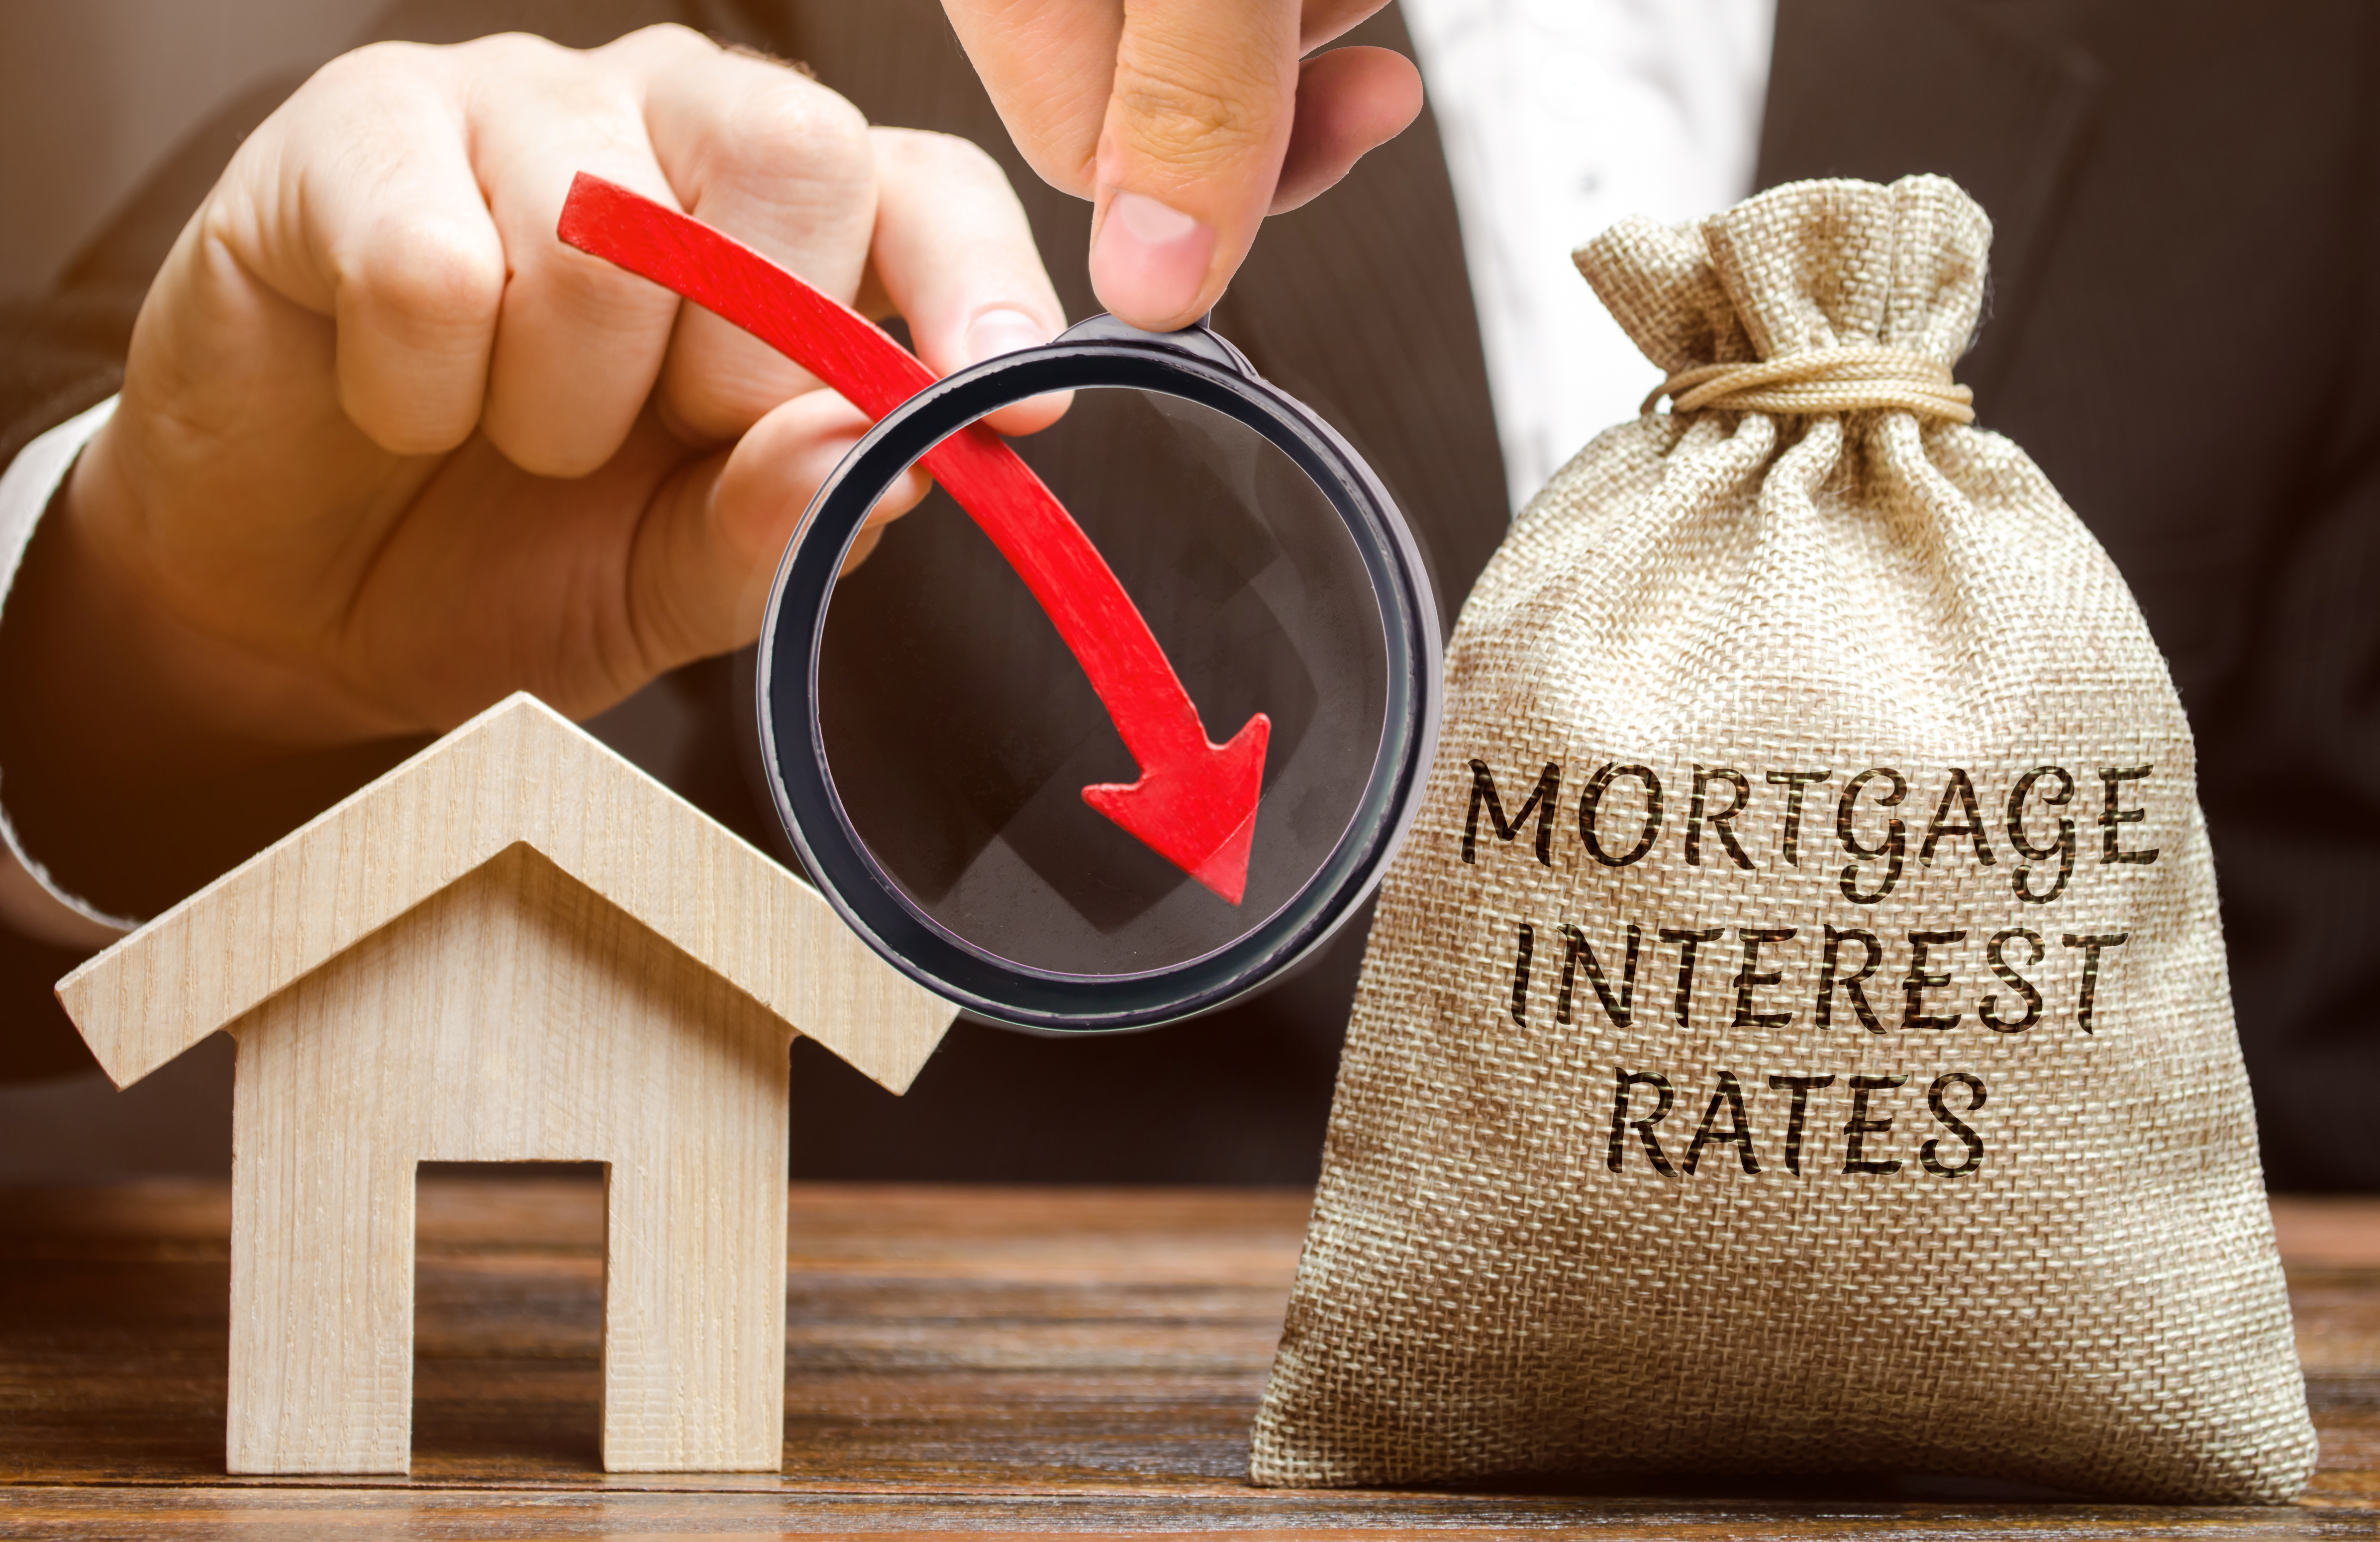 Grab Yourself an End of Year Buy to Let Mortgage Bargain – Rates Starting From 1.35%